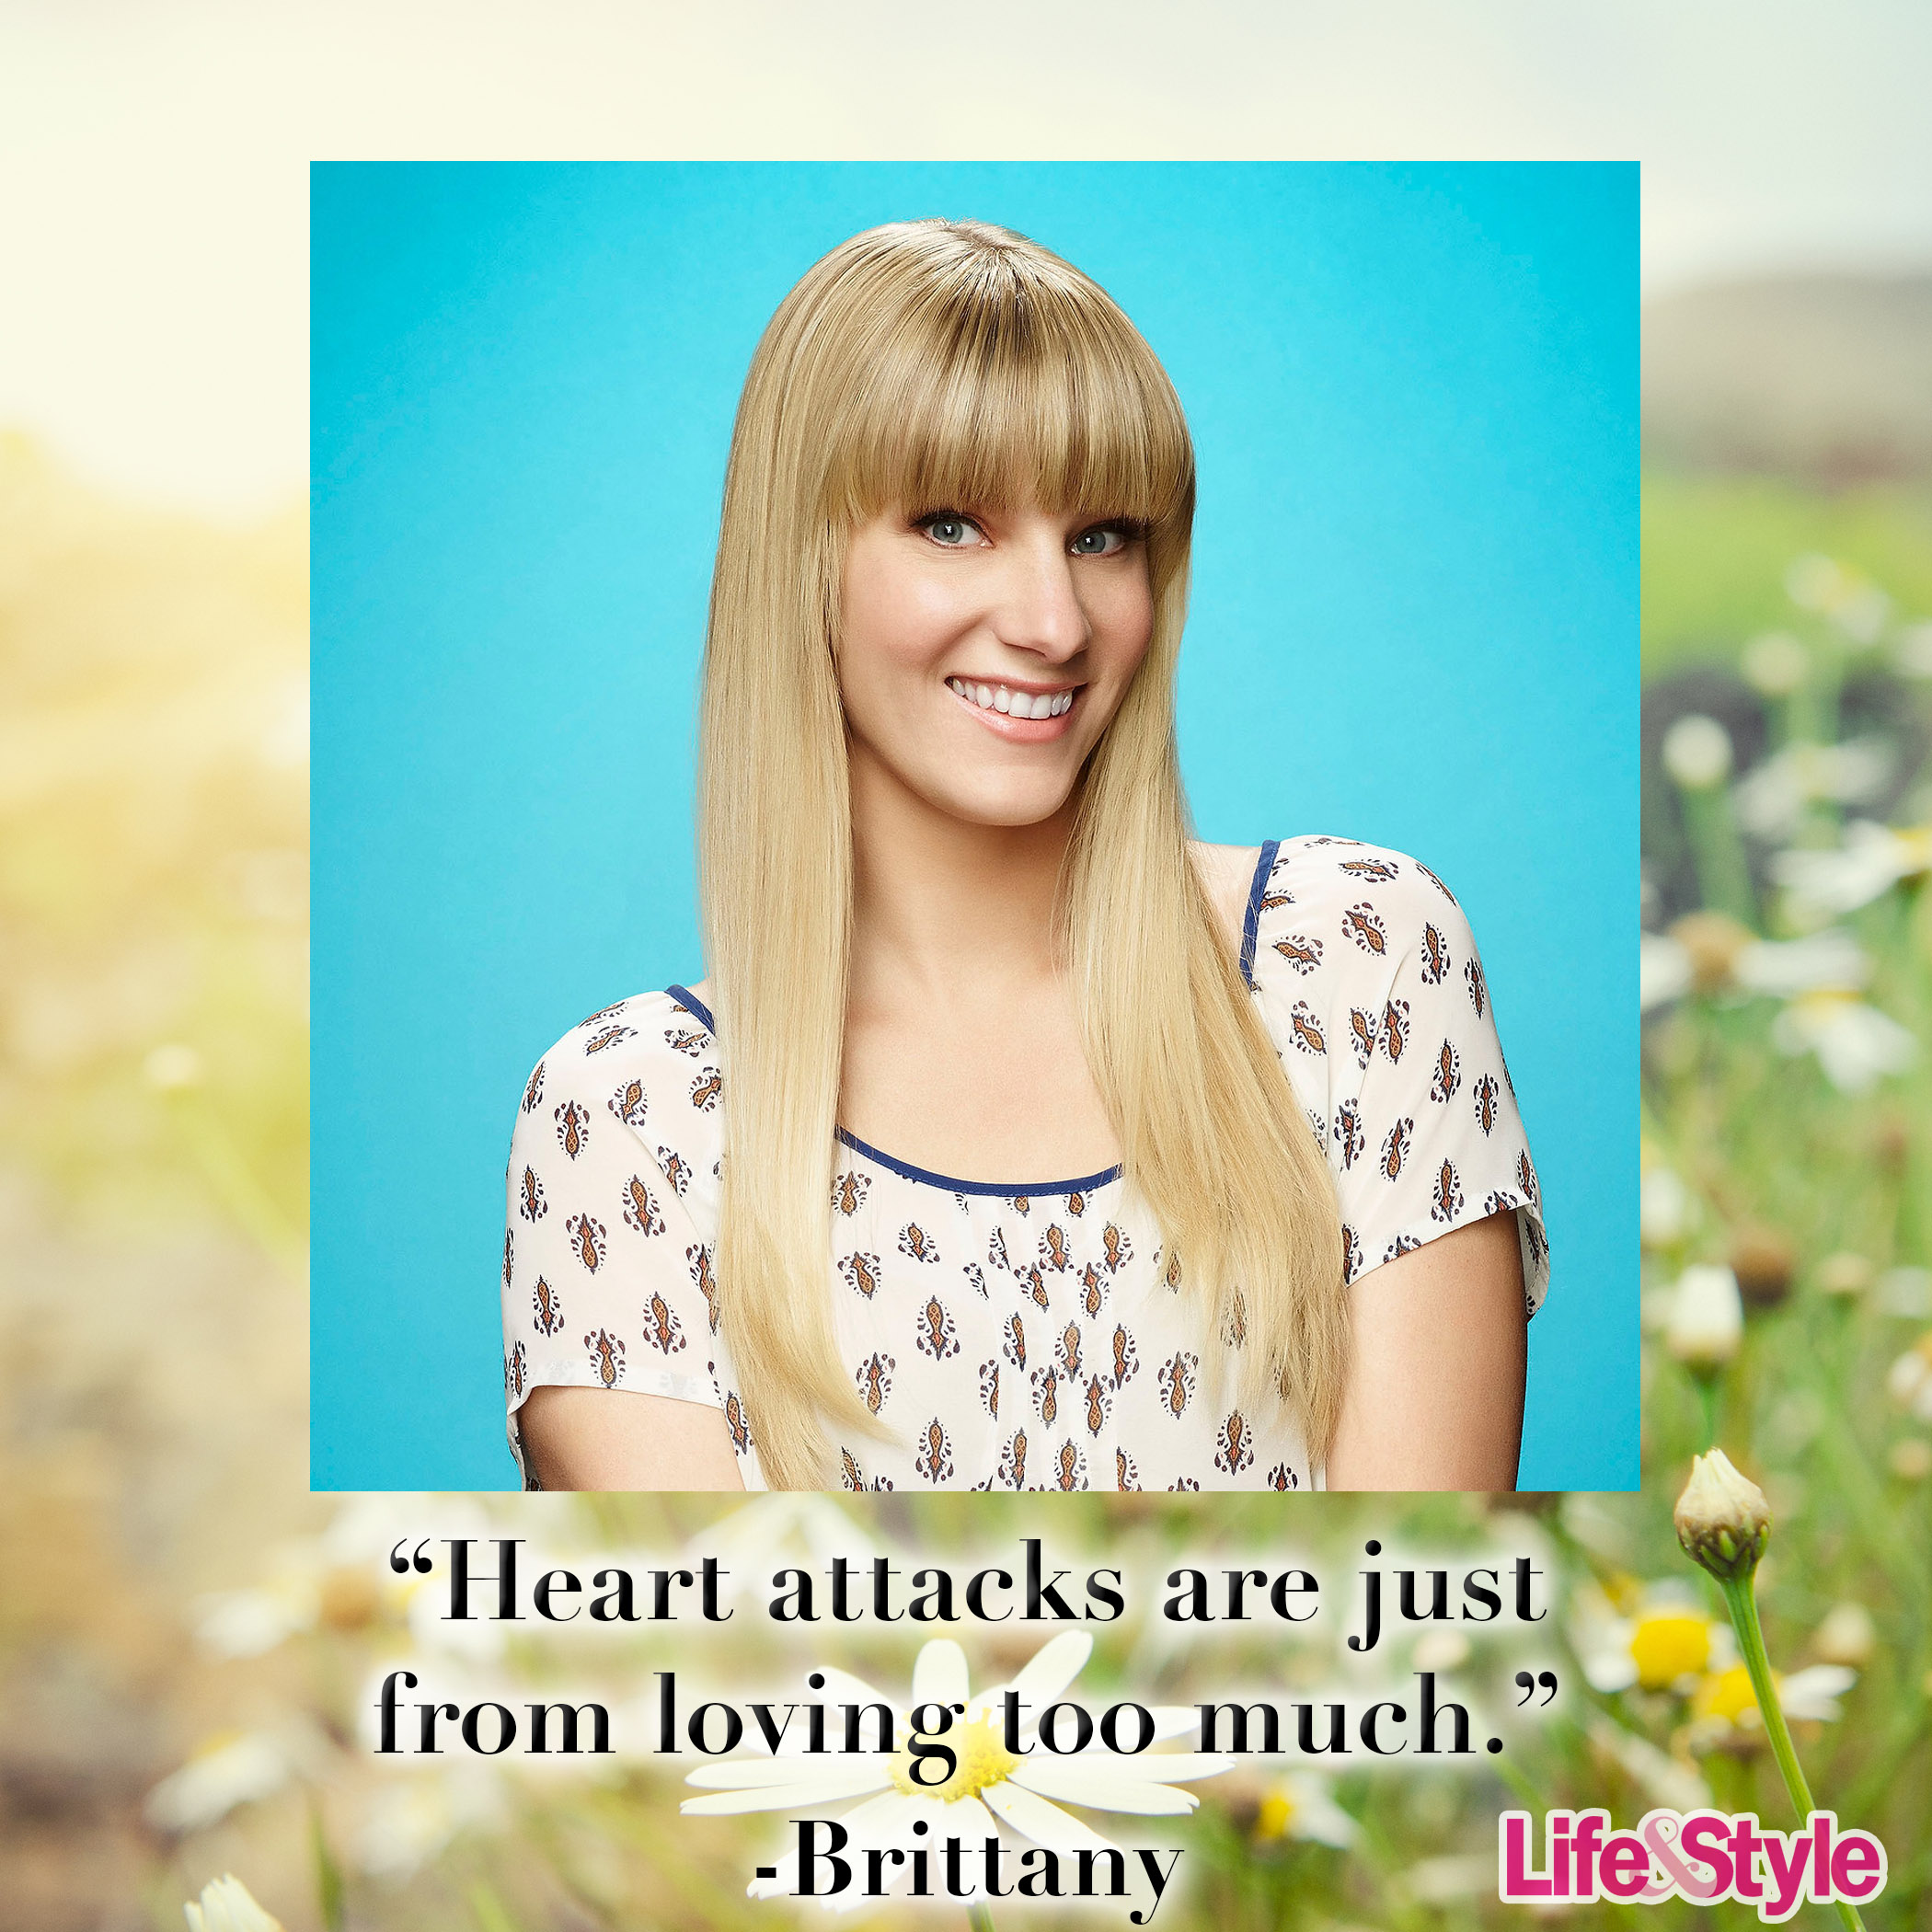 Glee Cast Quotes That Would Make Awesome Inspirational Posters